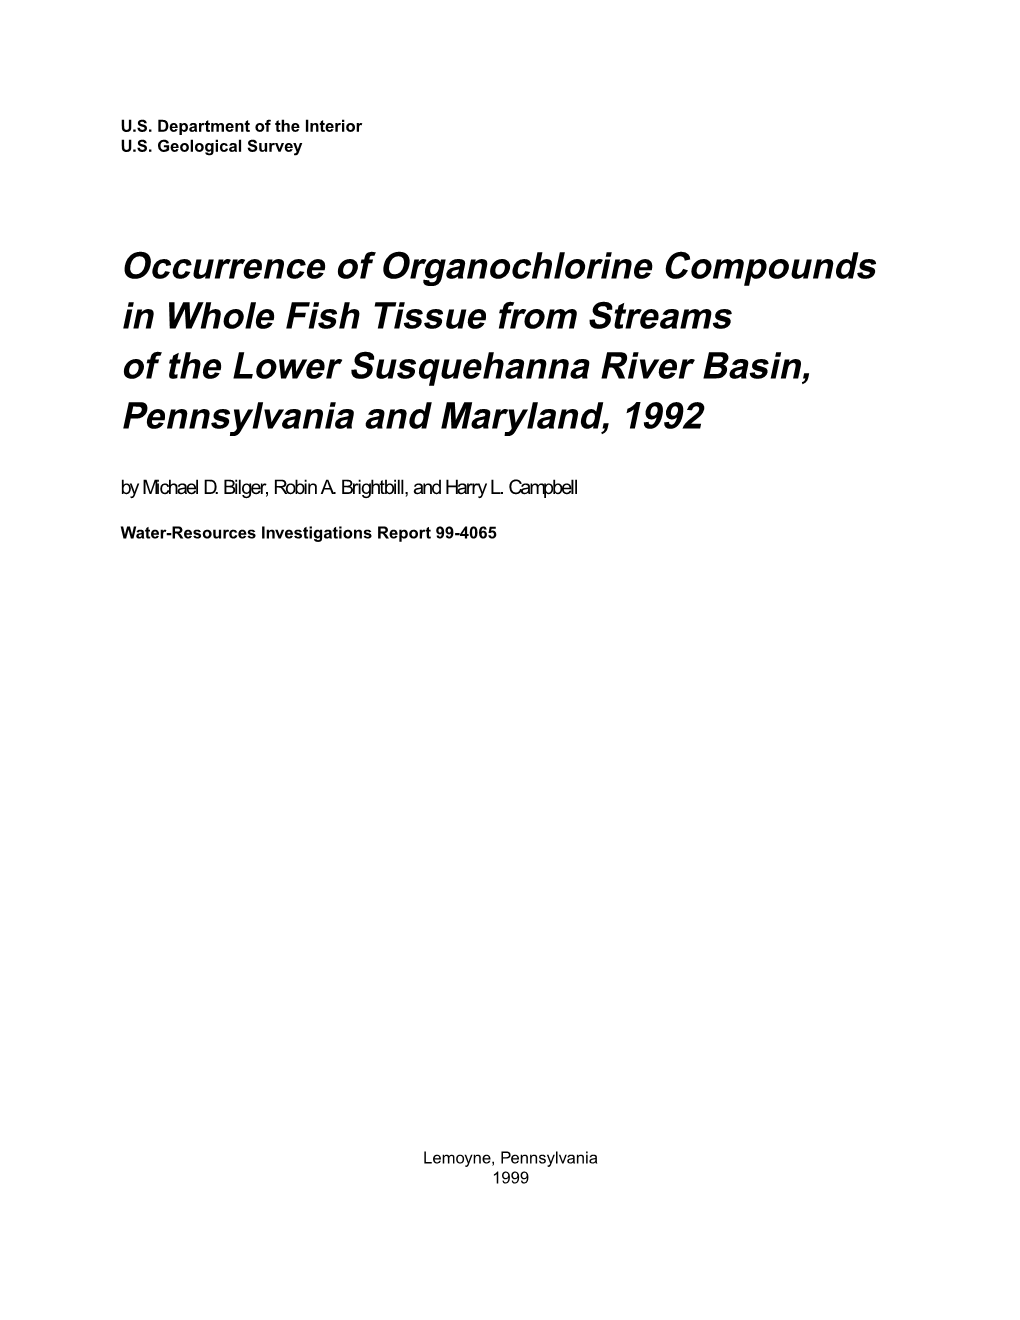 Occurrence of Organochlorine Compounds in Whole Fish Tissue from Streams of the Lower Susquehanna River Basin, Pennsylvania and Maryland, 1992 by Michael D